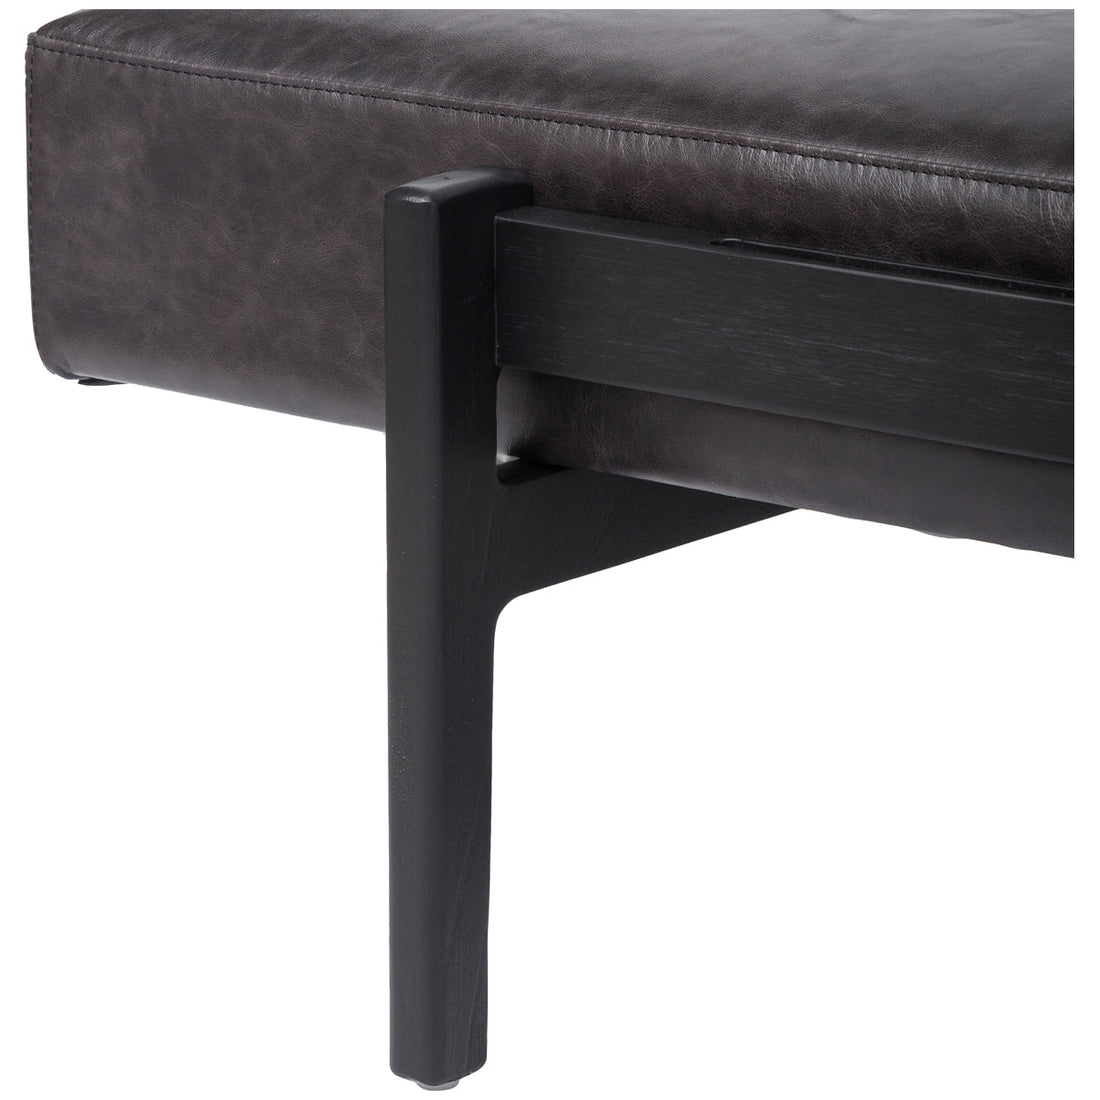 Four Hands Townsend Fawkes Bench - Brushed Ebony